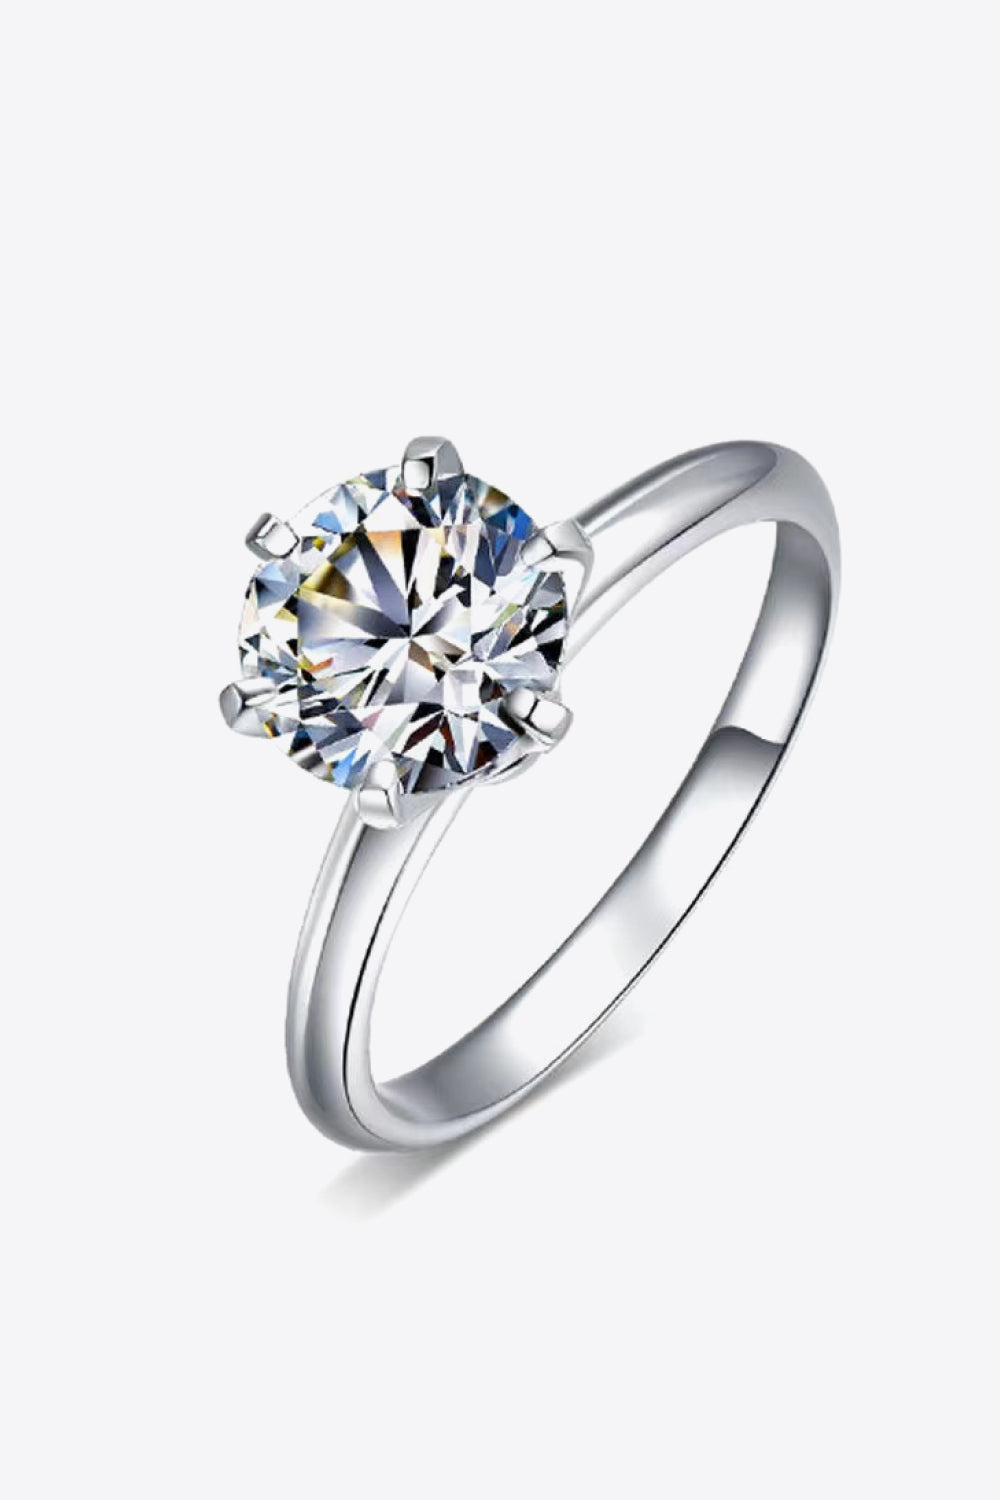 3 Carat Adored 925 Sterling Silver Moissanite 6-Prong Ring